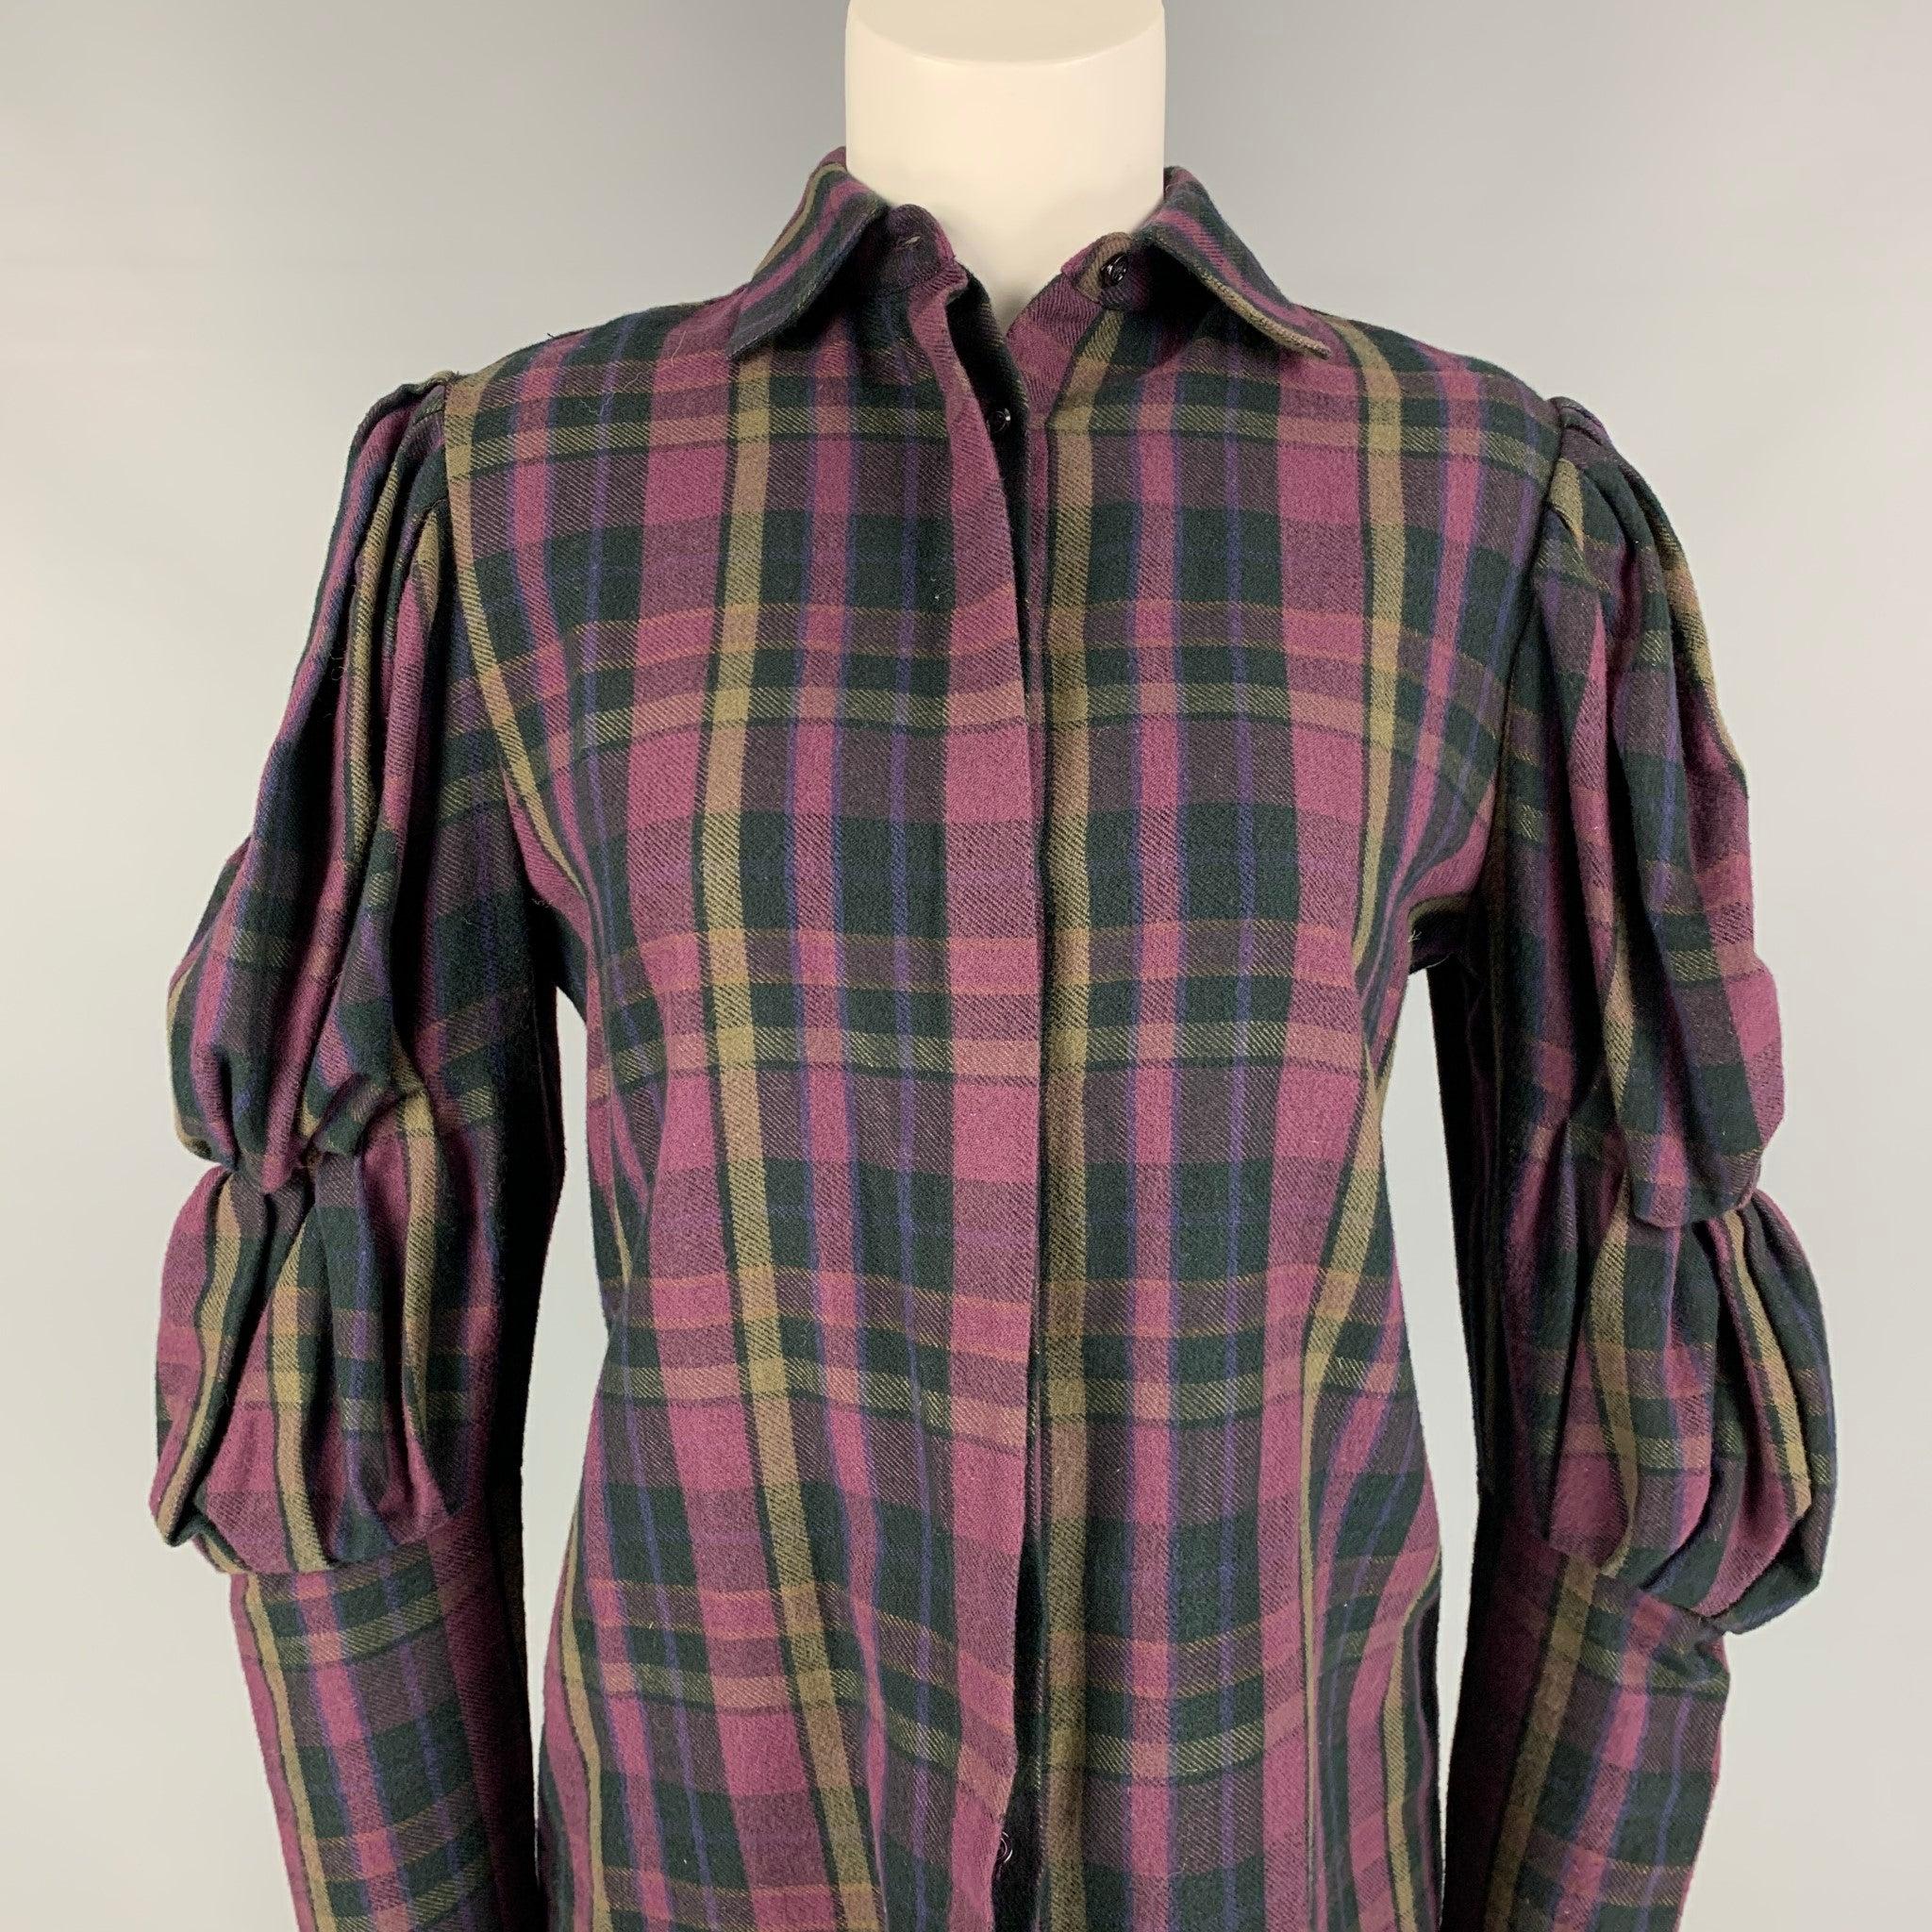 RALPH LAUREN Collection blouse comes in a purple & taupe plaid cotton featuring pleated sleeves, spread collar, and a hidden placket closure.
Very Good
Pre-Owned Condition. 

Marked:   4 

Measurements: 
 
Shoulder: 14.5 inches  Bust: 36 inches 